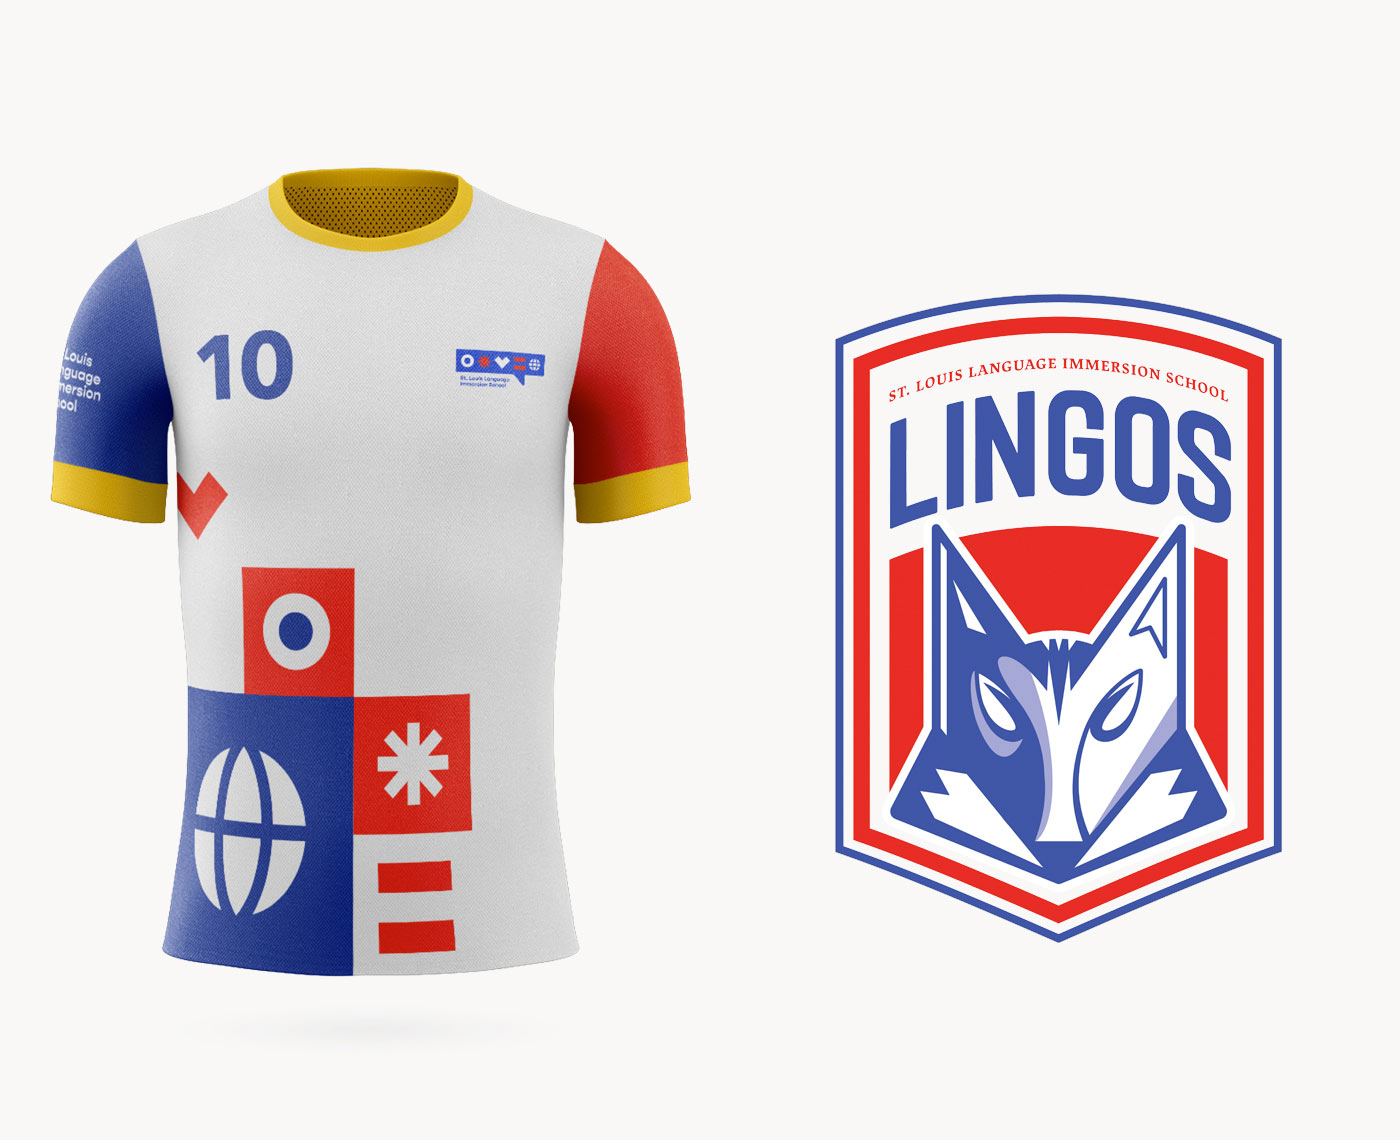 A mockup showing how St. Louis Language Immersion School's new branding could be expressed on a sports jersey